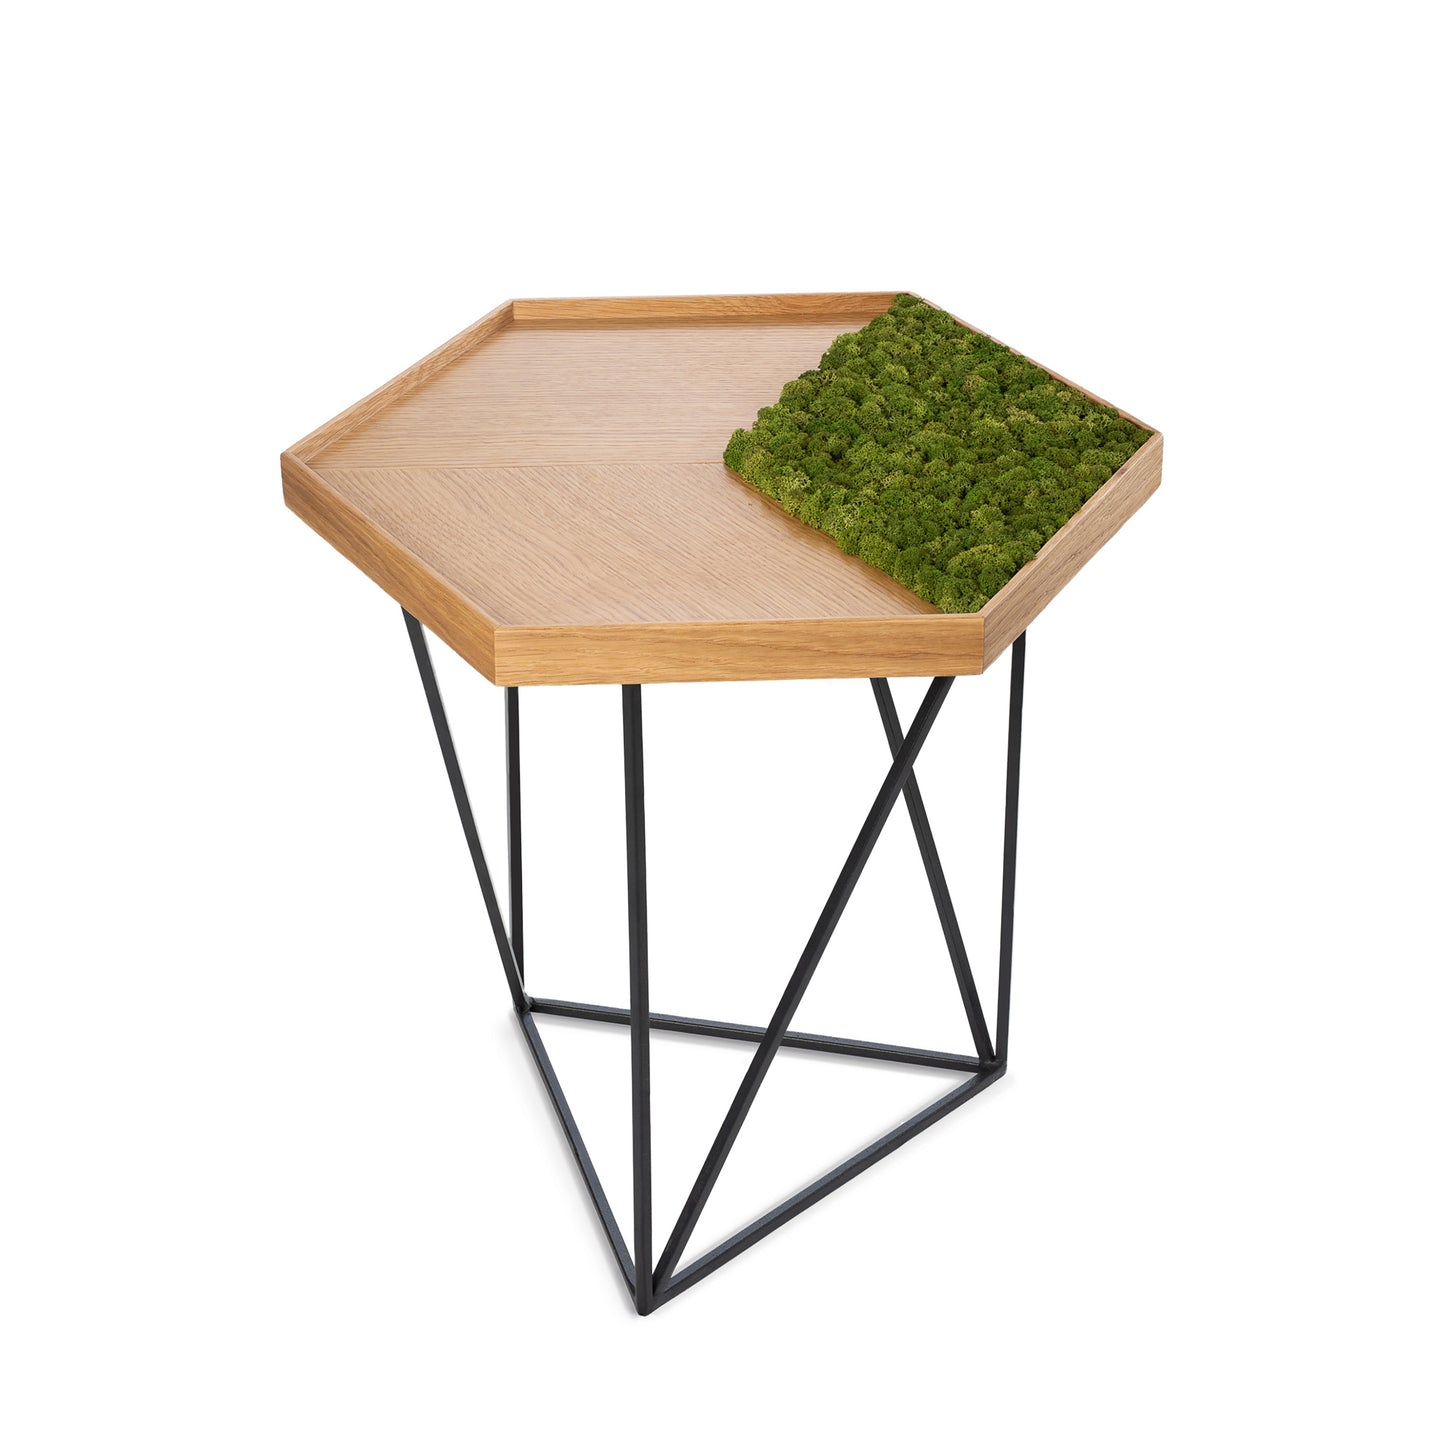 ForME Coffee Table